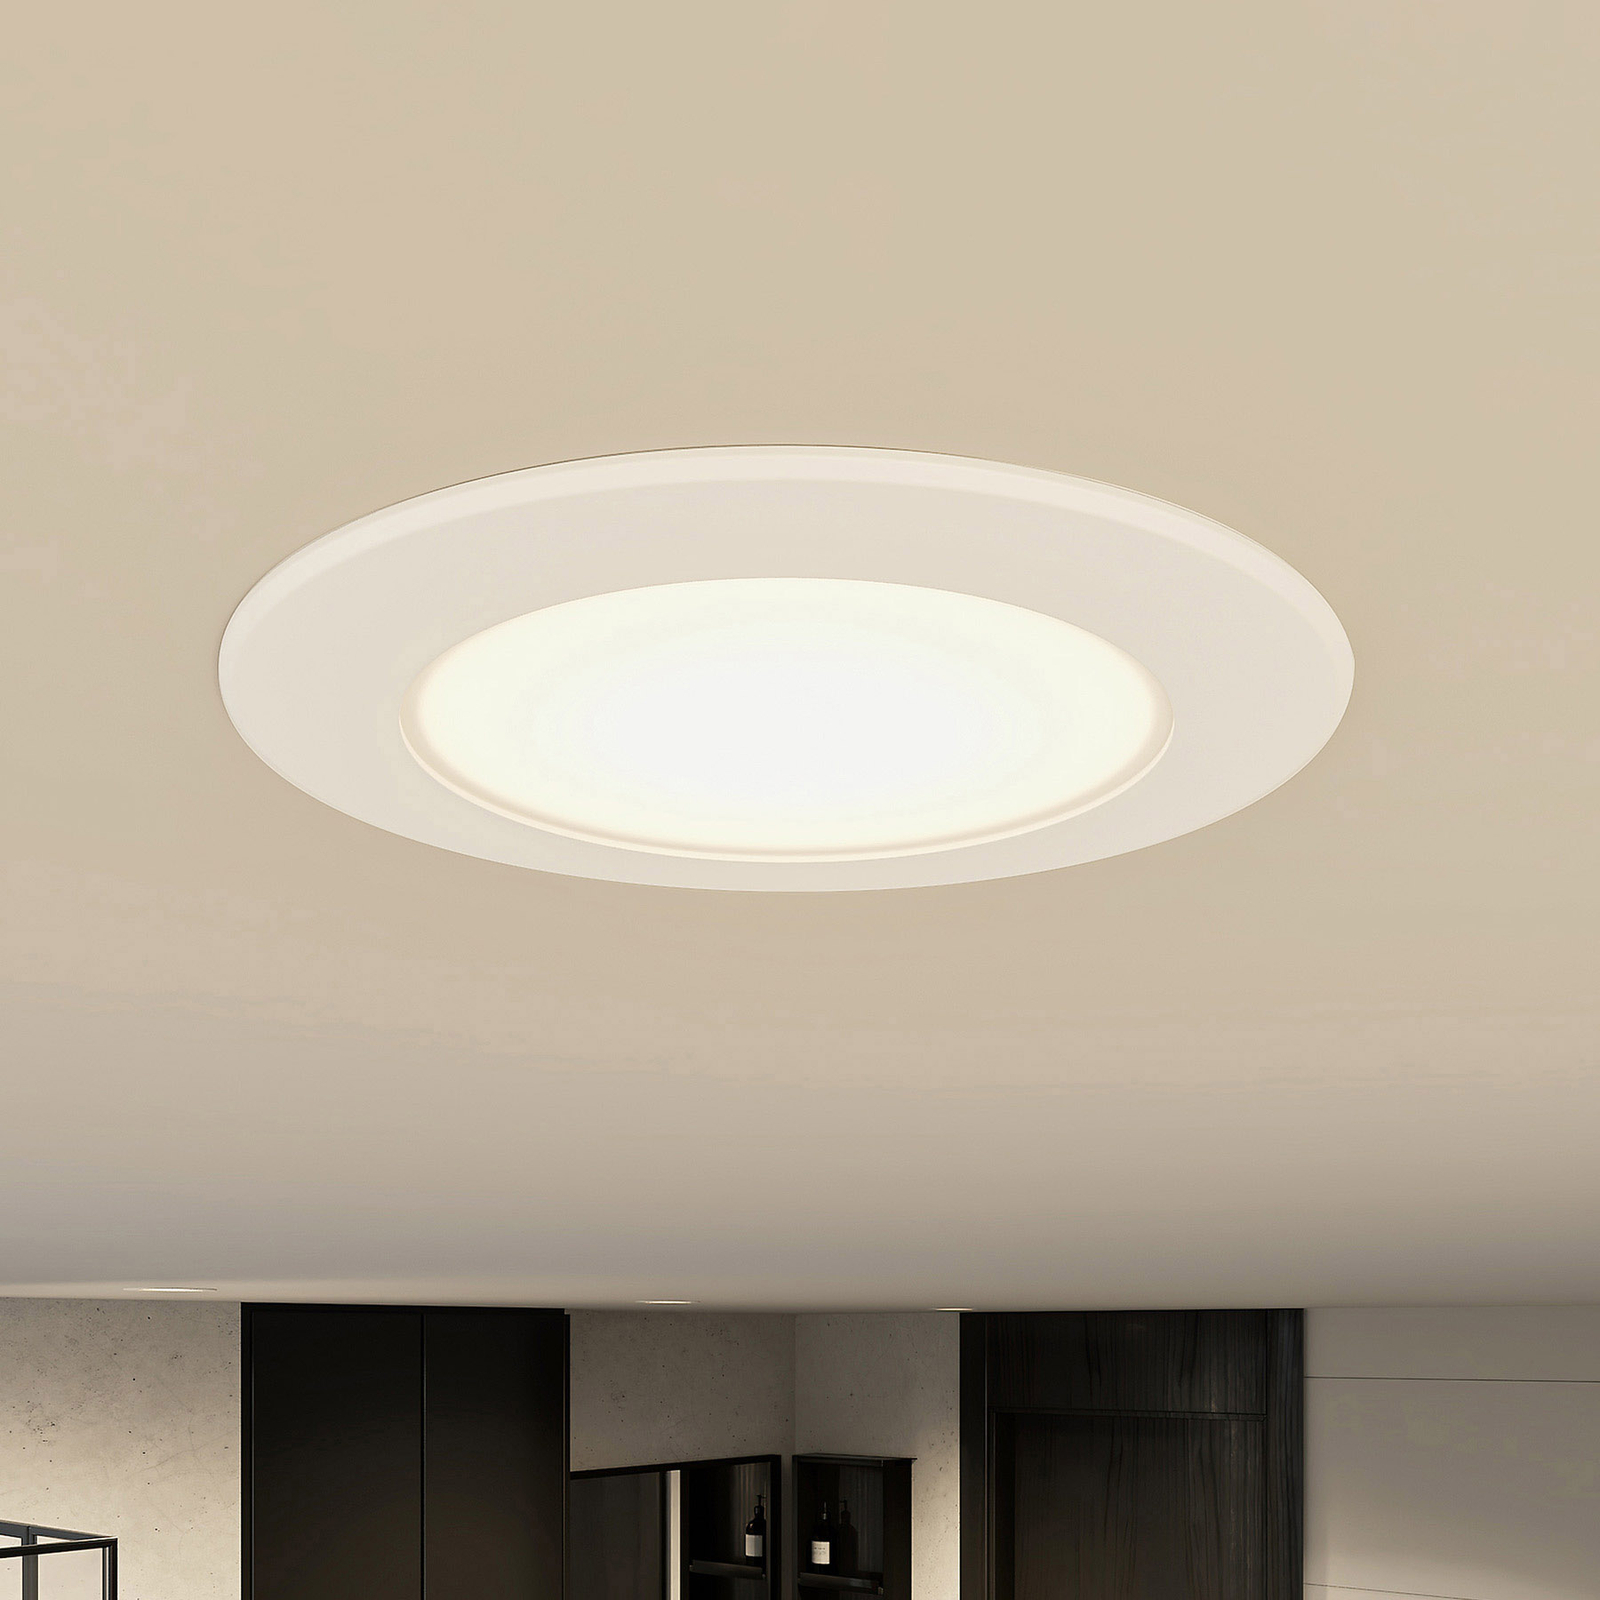 Prios LED recessed light Rida, 11.5cm, 9W, 10pcs, CCT, dimmable